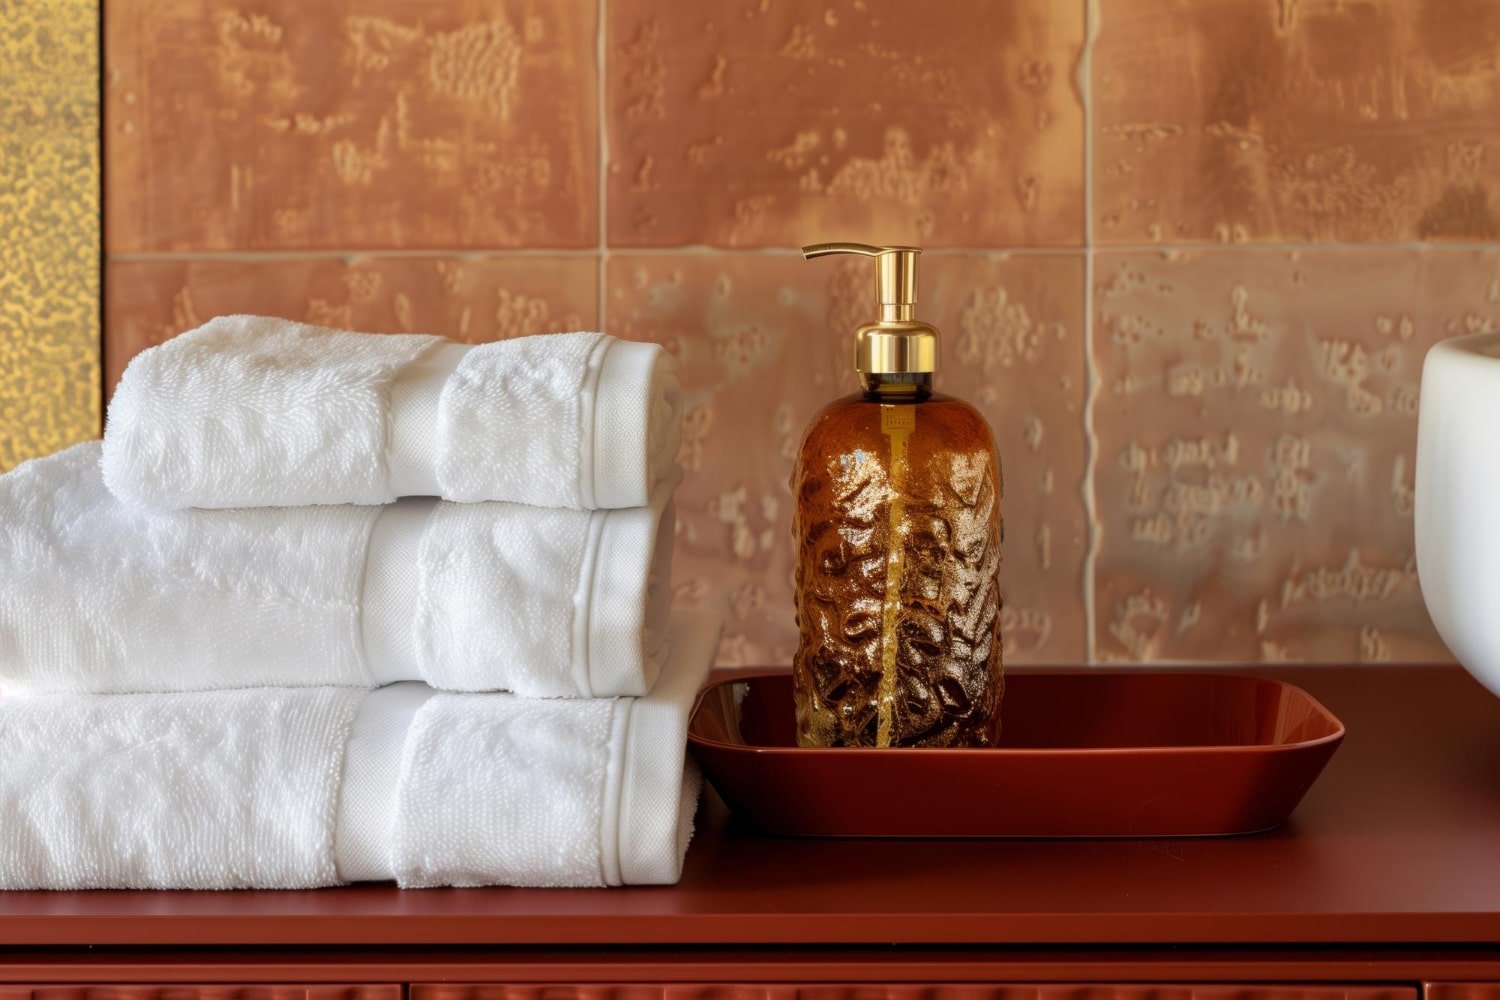 You are currently viewing Decorate Elegantly With Kassatex’s Luxury Bath Linens And Home Accessories